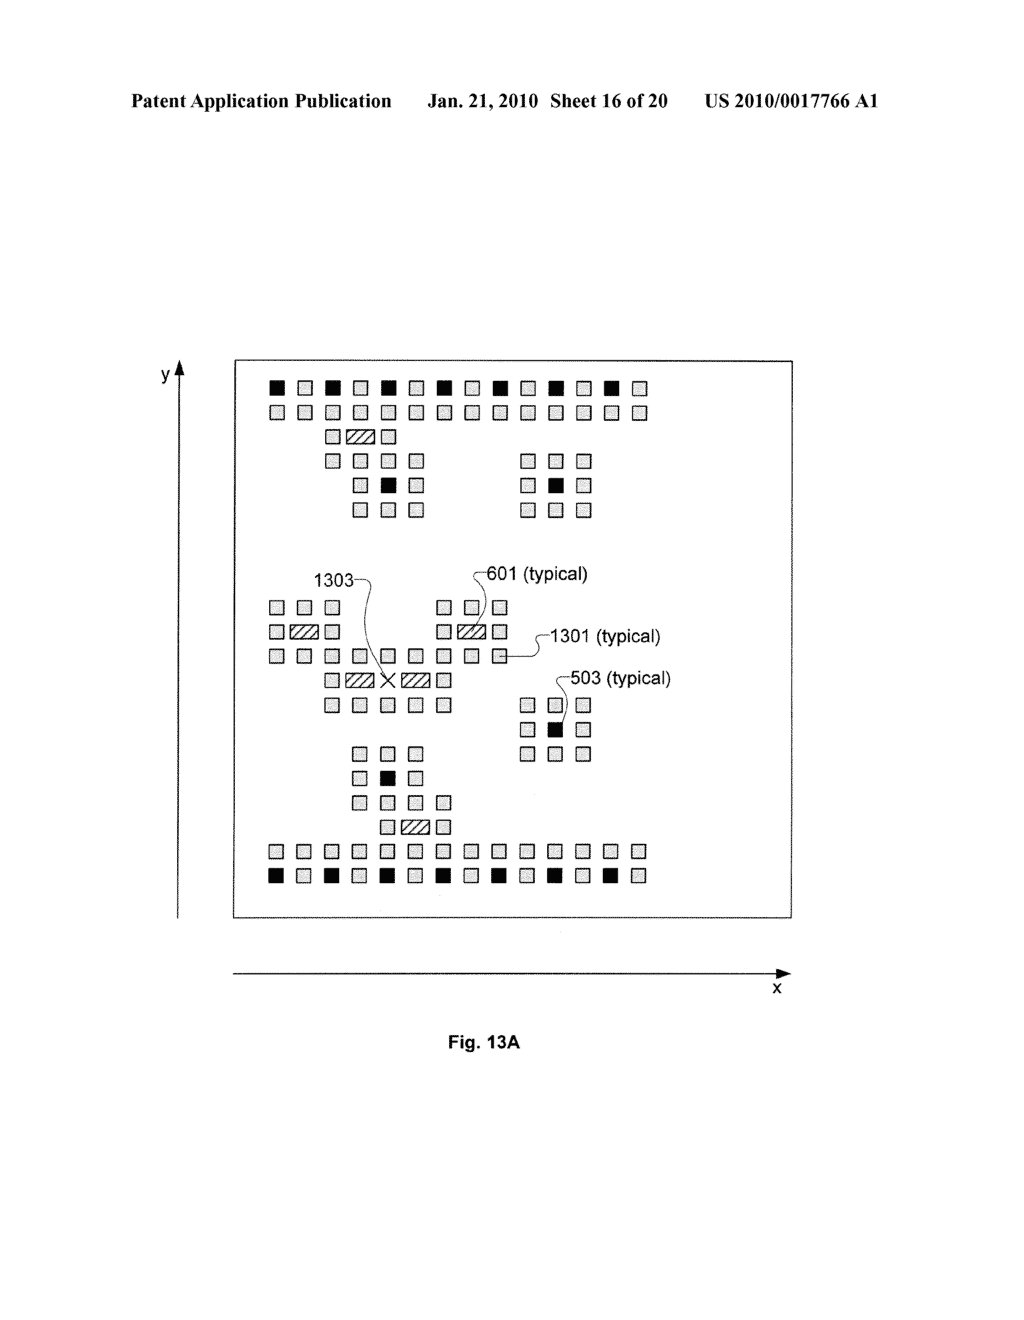 Semiconductor Device Layout Including Cell Layout Having Restricted Gate Electrode Level Layout with Linear Shaped Gate Electrode Layout Features Defined with Minimum End-to-End Spacing and At Least Eight Transistors - diagram, schematic, and image 17